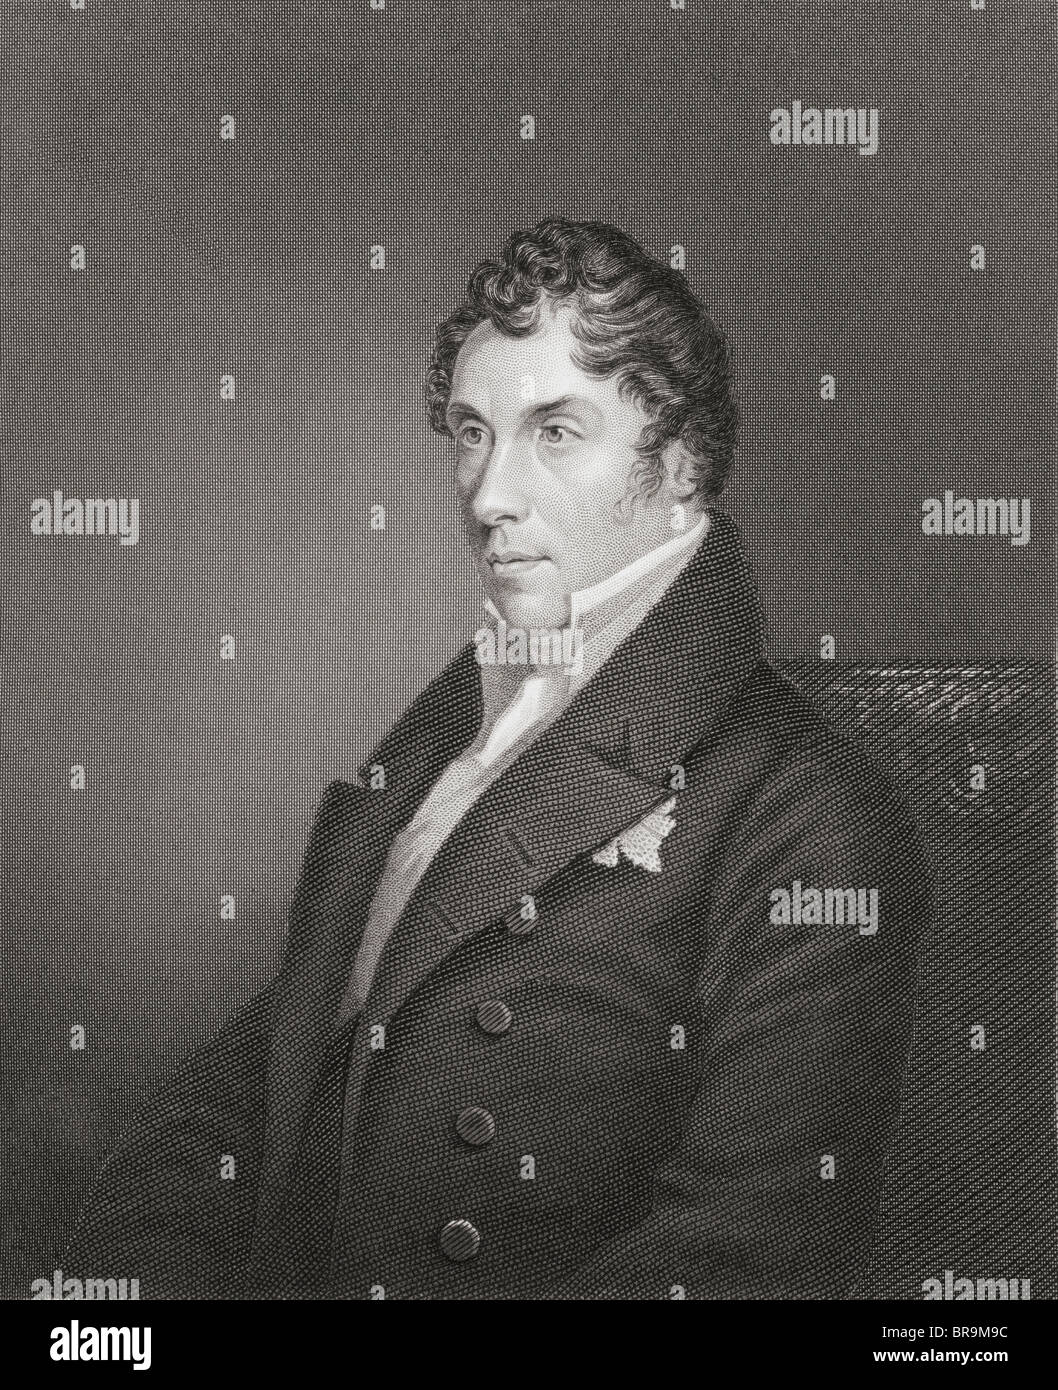 George John James Hamilton-Gordon, 5th Earl of Aberdeen, 1816 to 1864. British peer and Liberal Party politician. Stock Photo